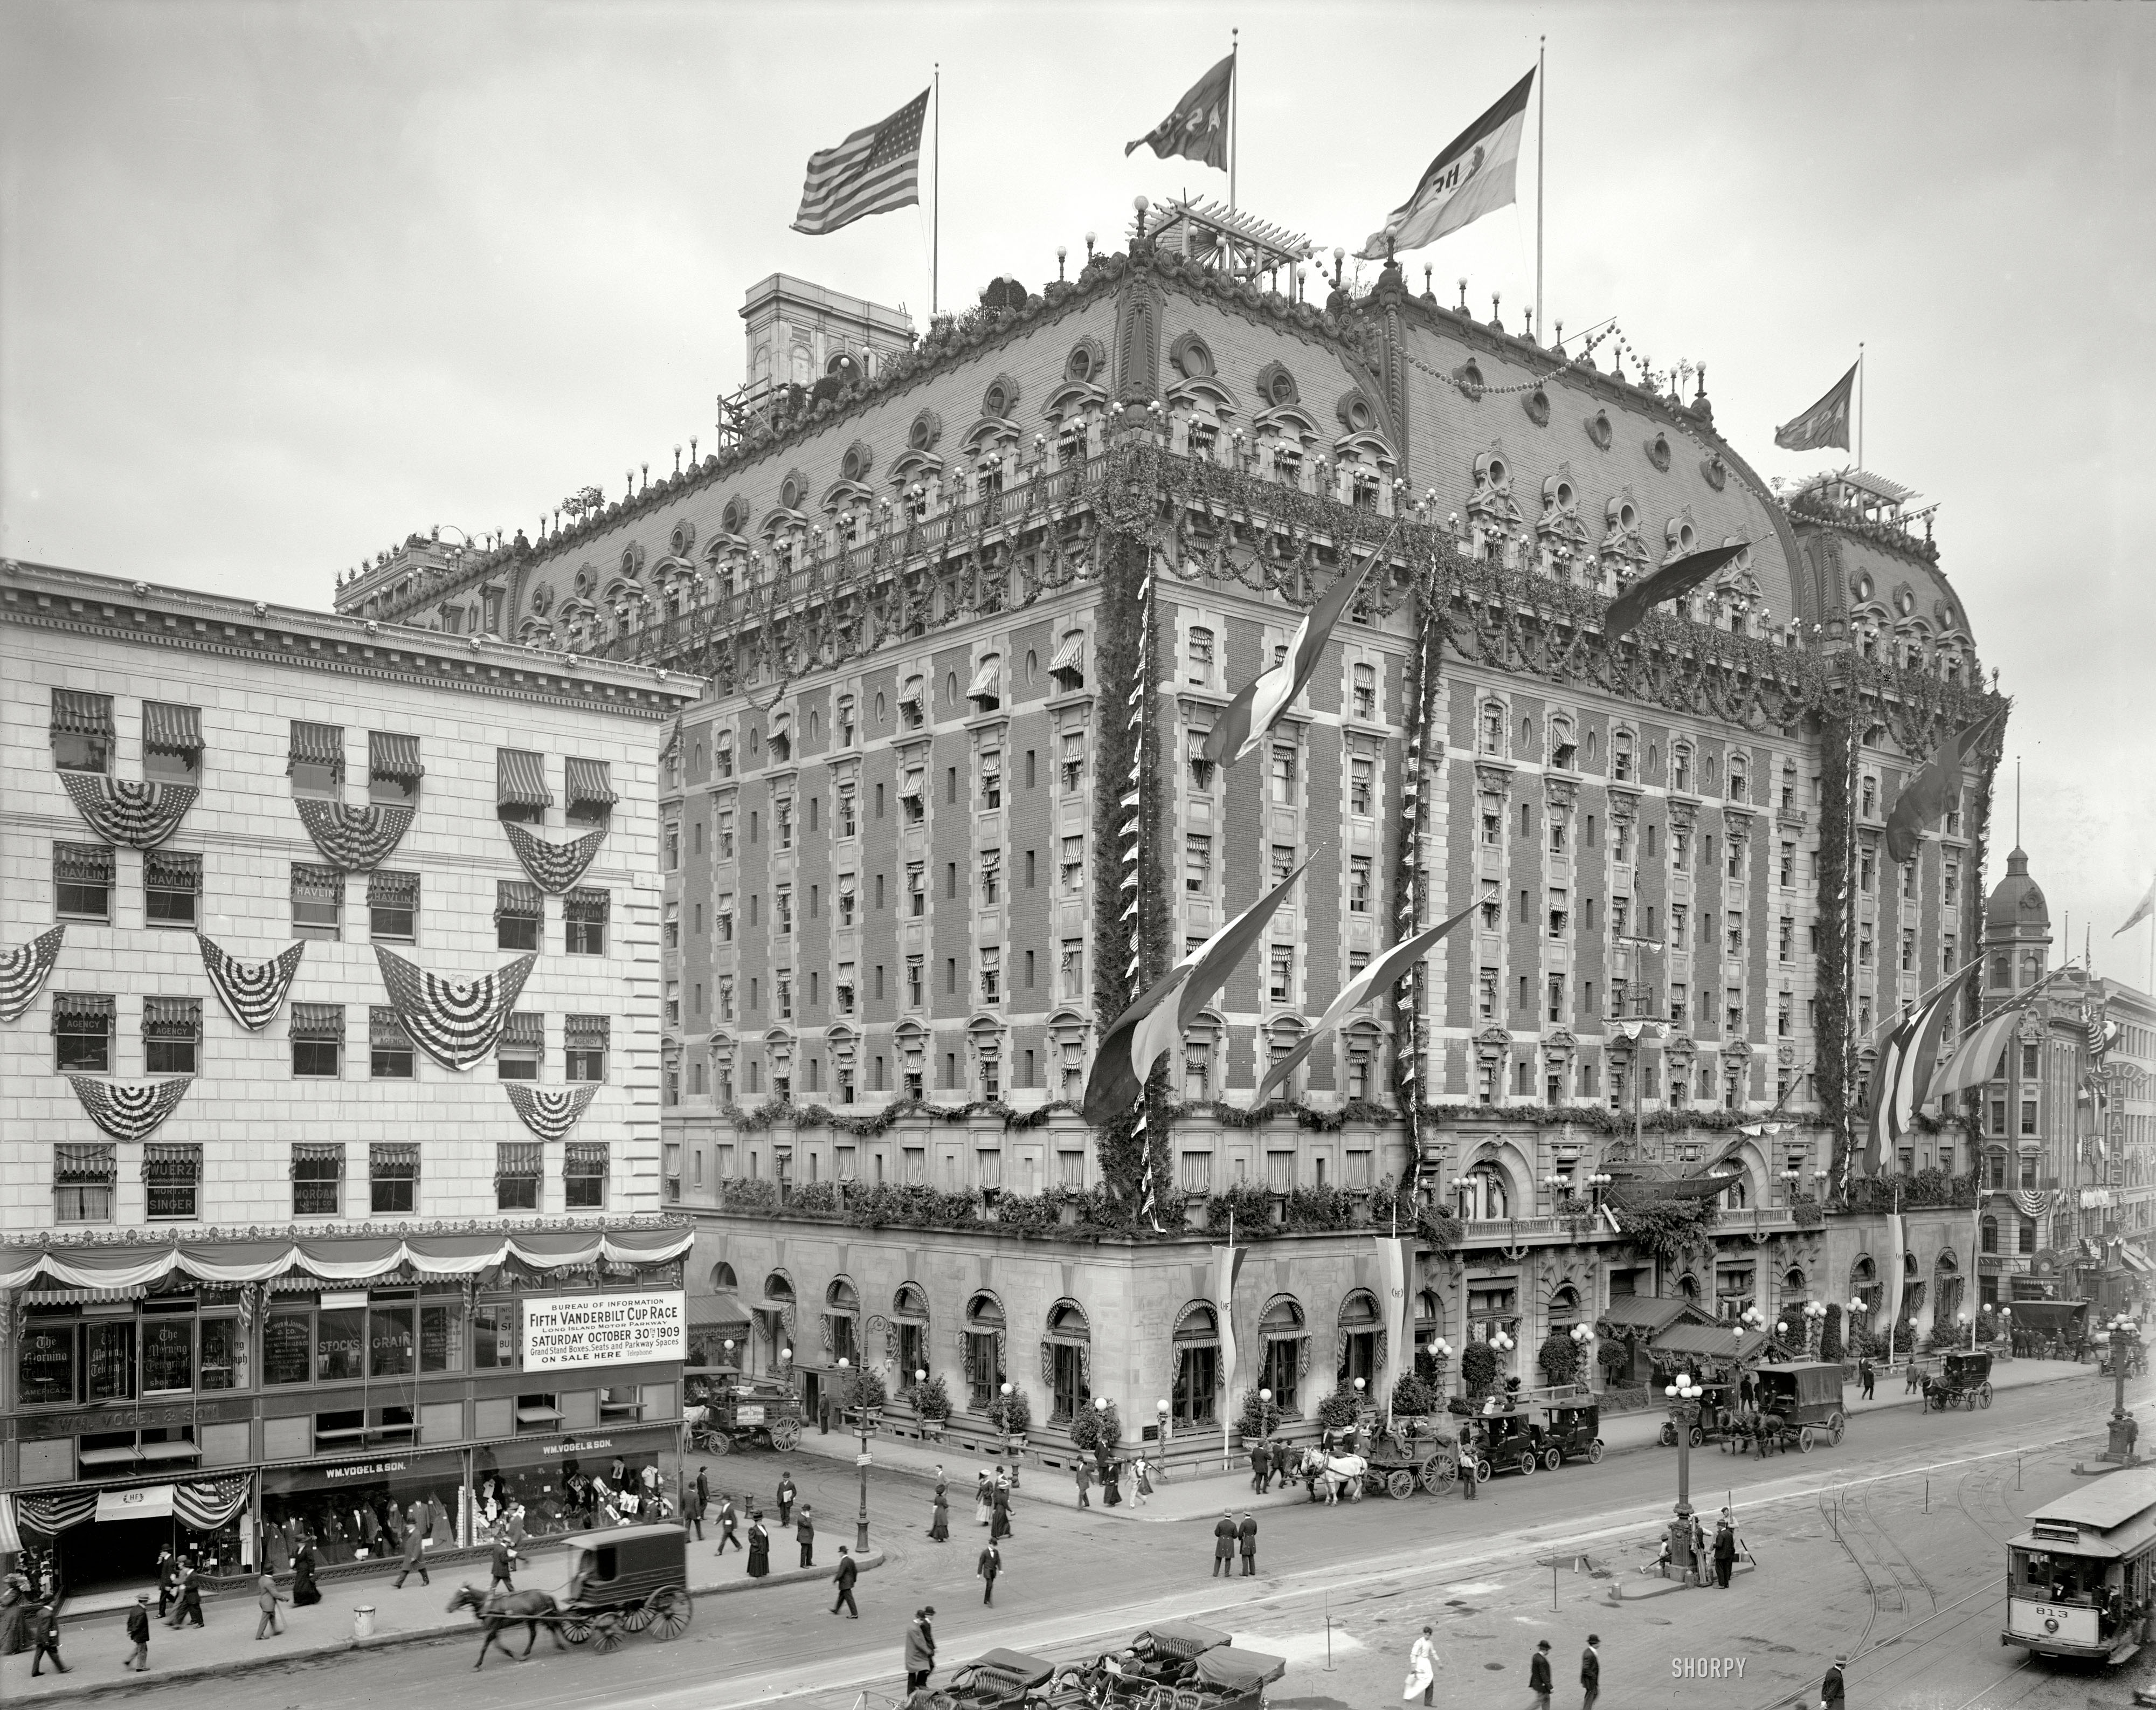 New York, 1909. "Hotel Astor, Times Square." Points of interest include the galleon lodged in the hotel facade, as well as a sign on the building next door advertising the fifth Vanderbilt Cup auto race. View full size.